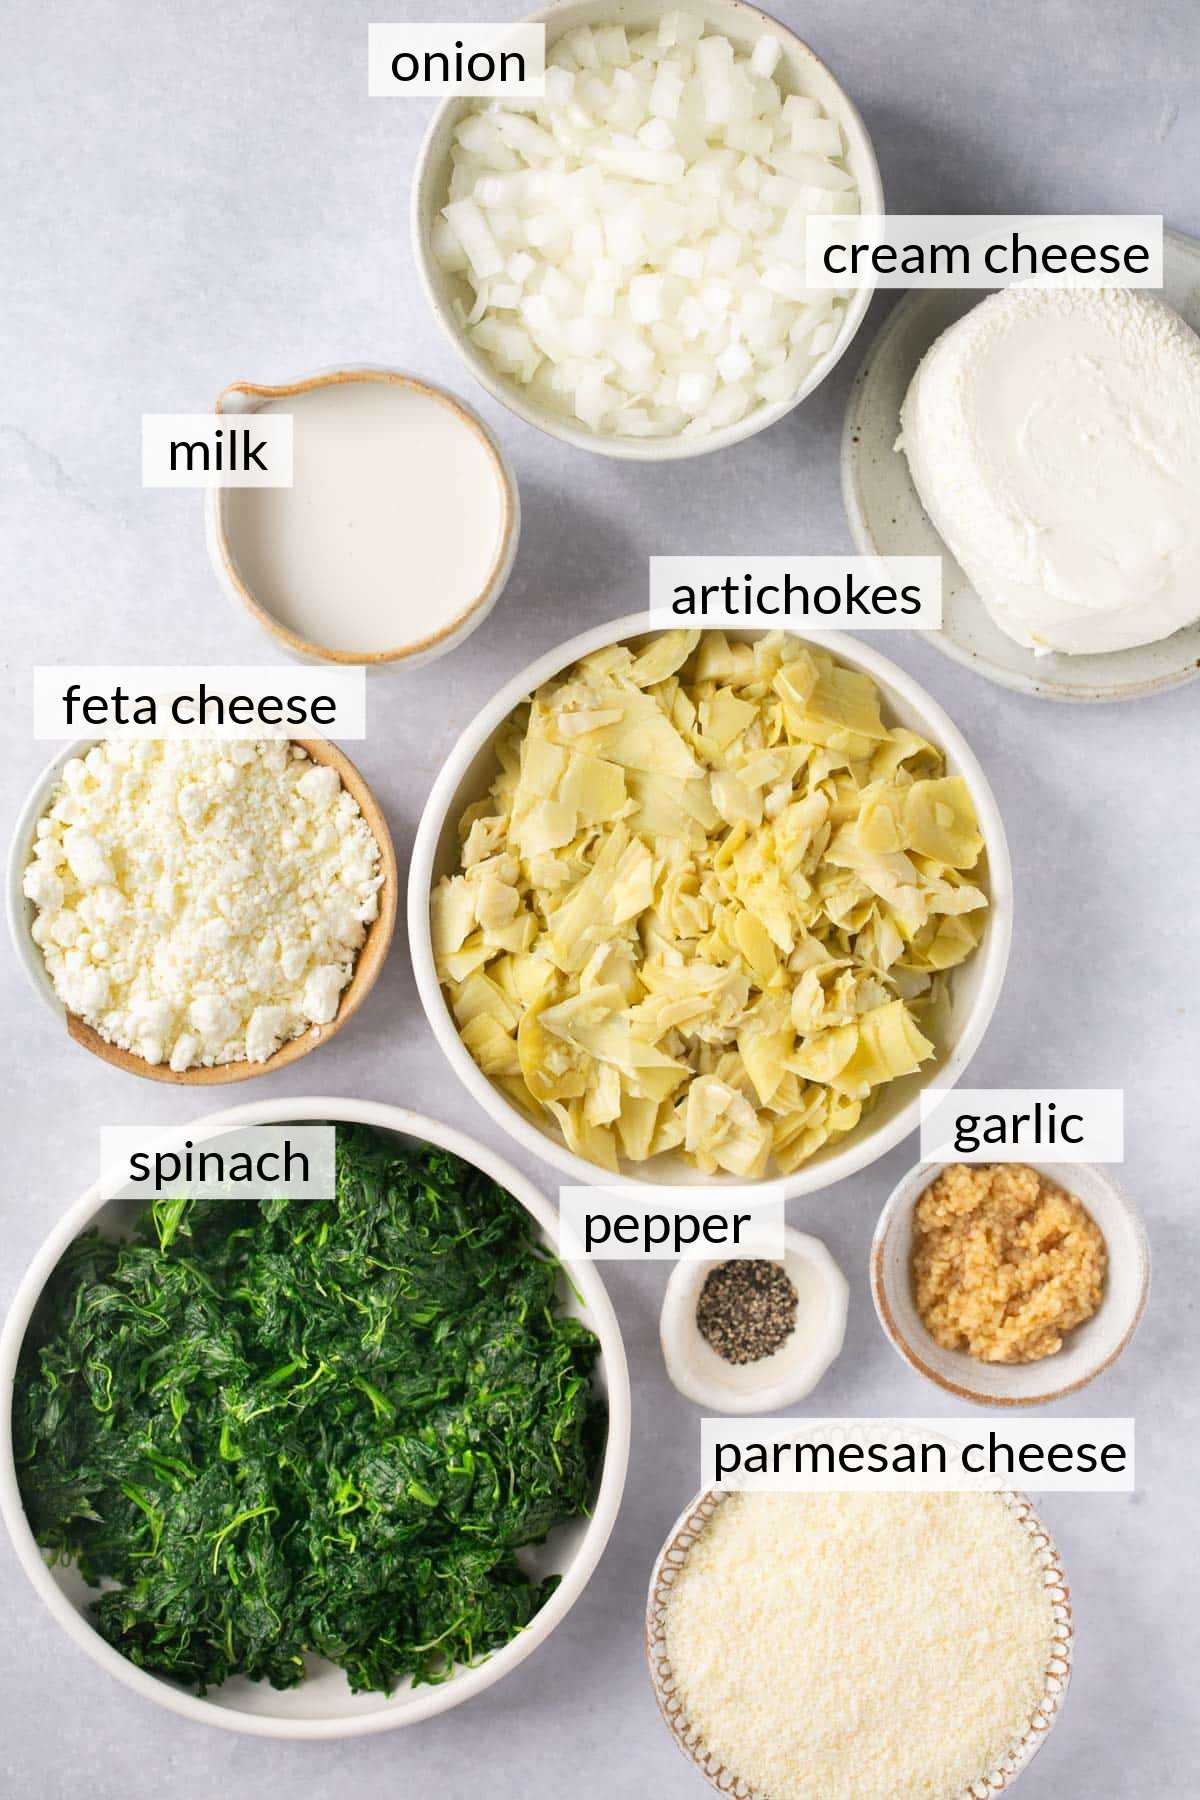 Spinach, artichokes, cream cheese, milk, parmesan cheese and feta cheese divided into small bowls.